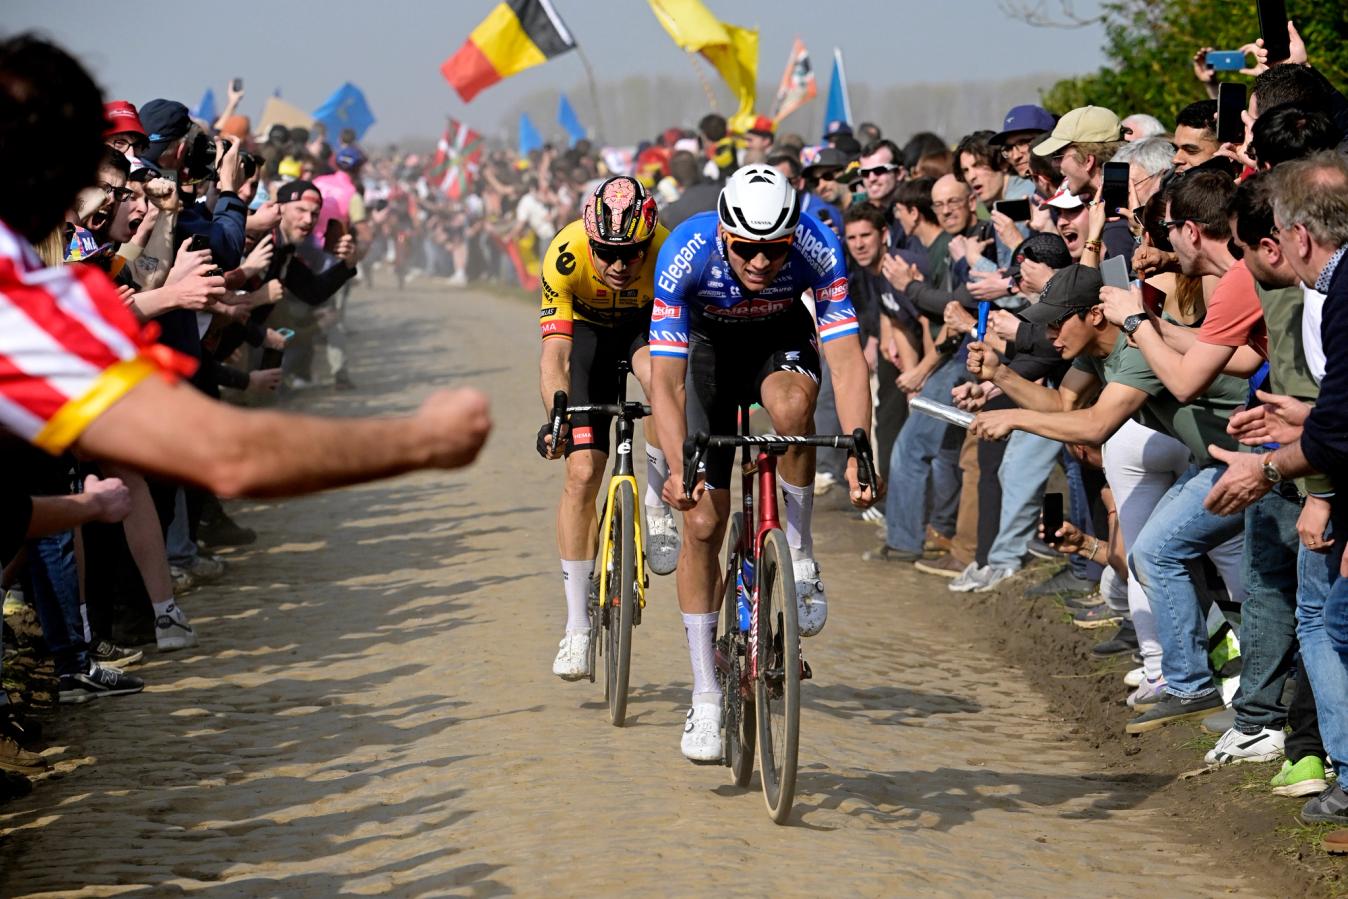 There aren’t many races more iconic or well-known than Paris-Roubaix or, as some like to call it, the ‘Hell of the North’.